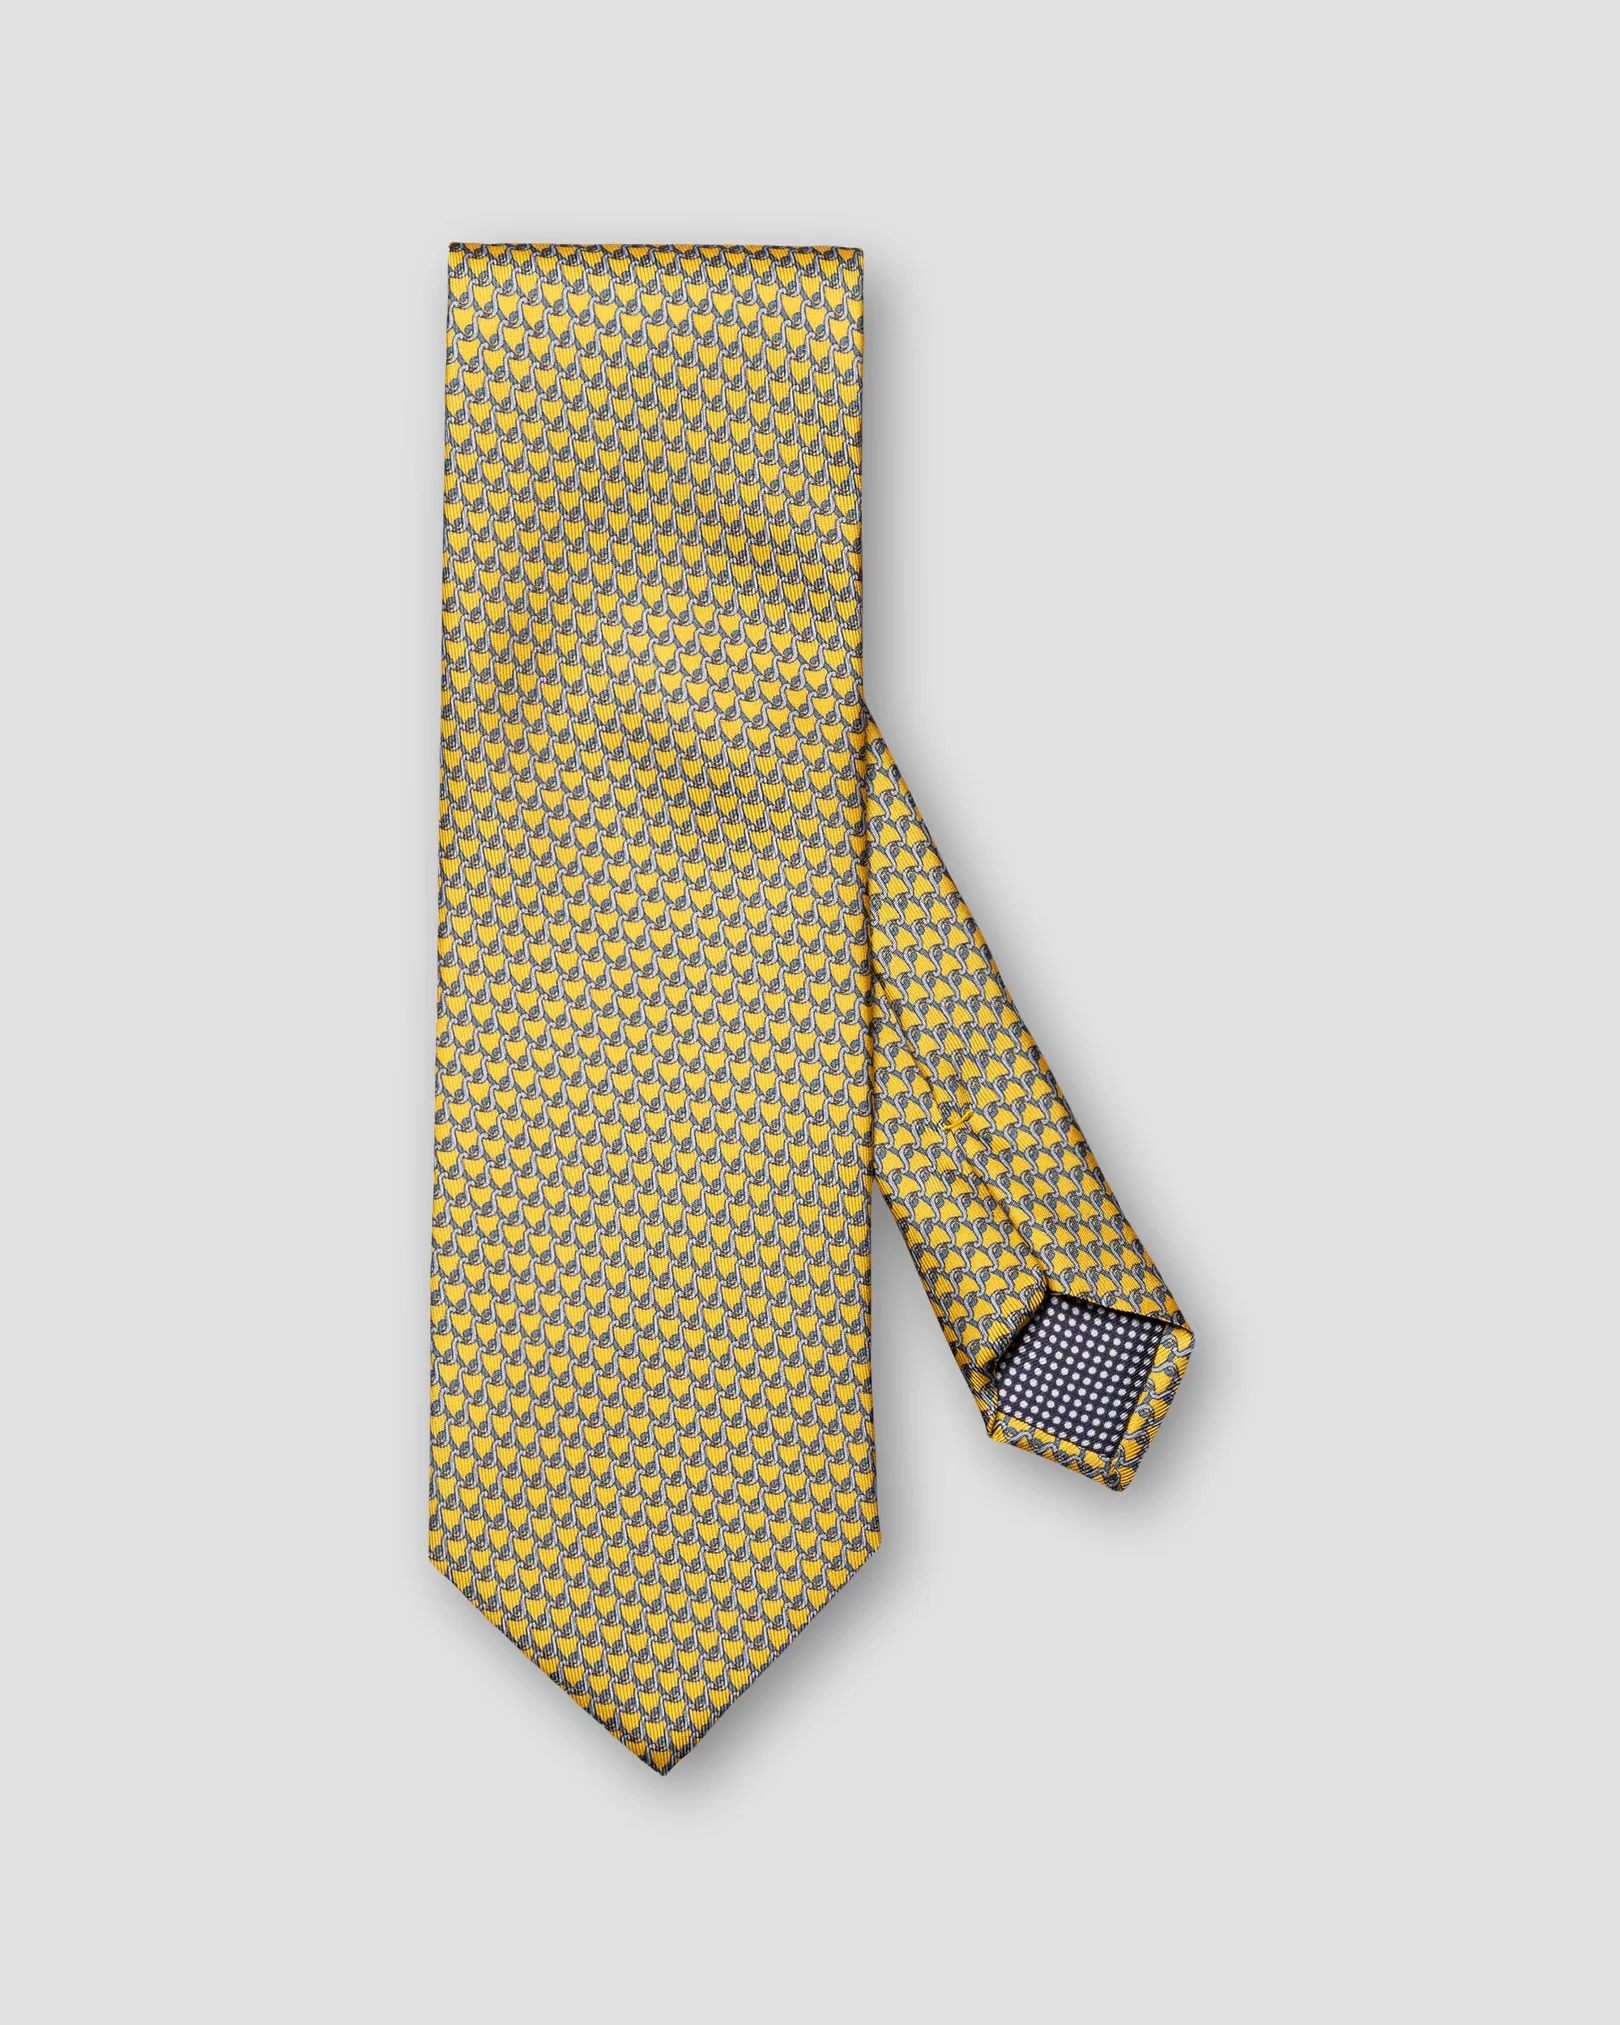 Eton - yellow crafted tie